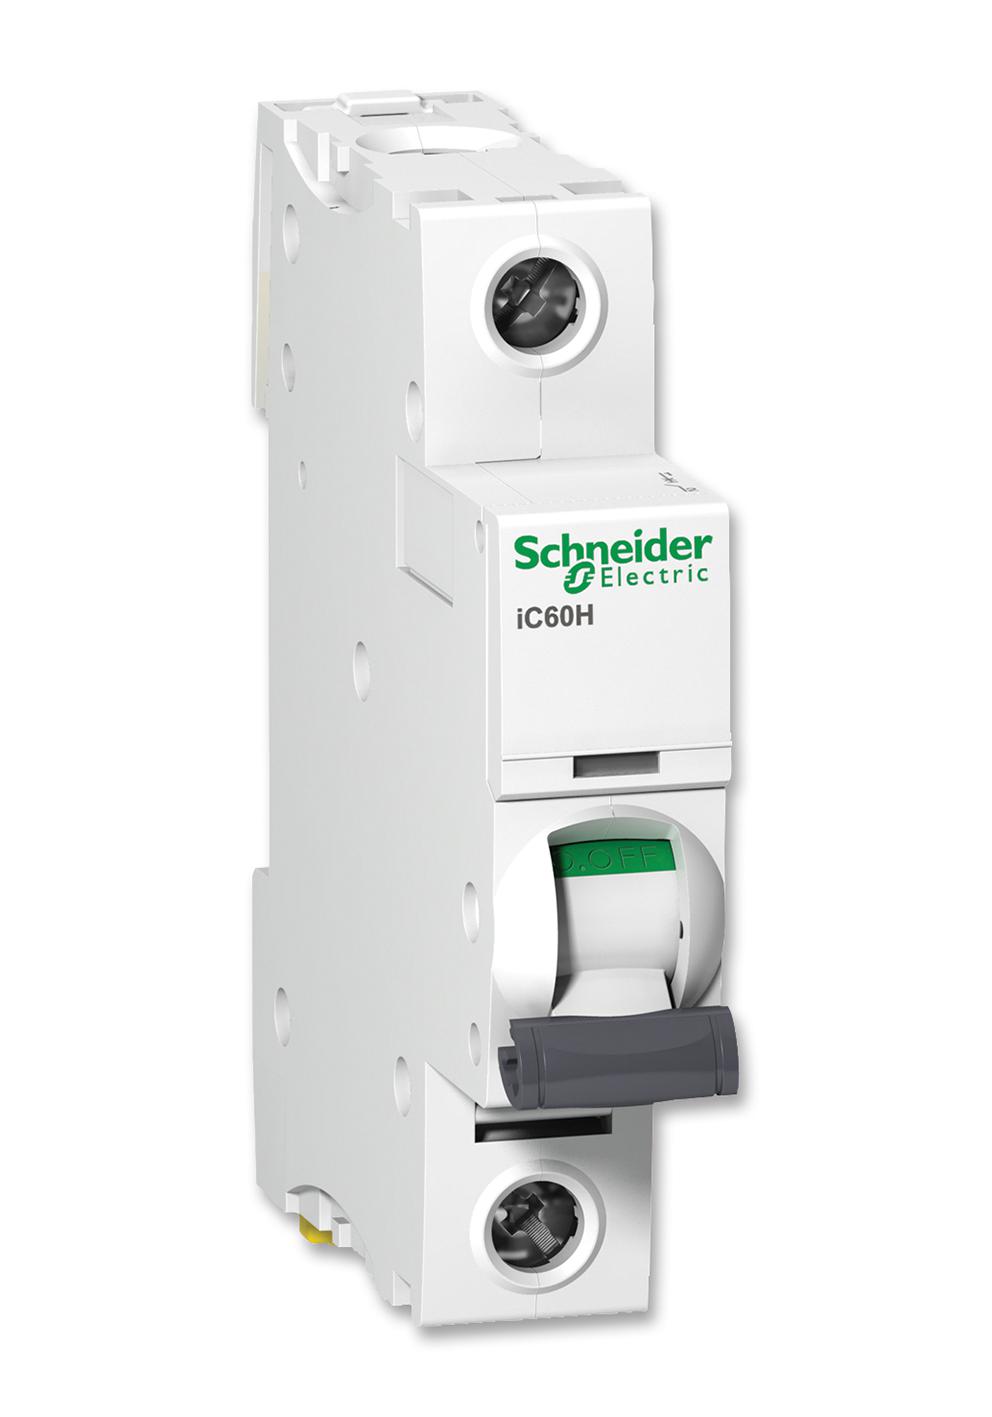 A9F54120 CIRCUIT BREAKER, THERMAL MAGNETIC, 1POLE SCHNEIDER ELECTRIC